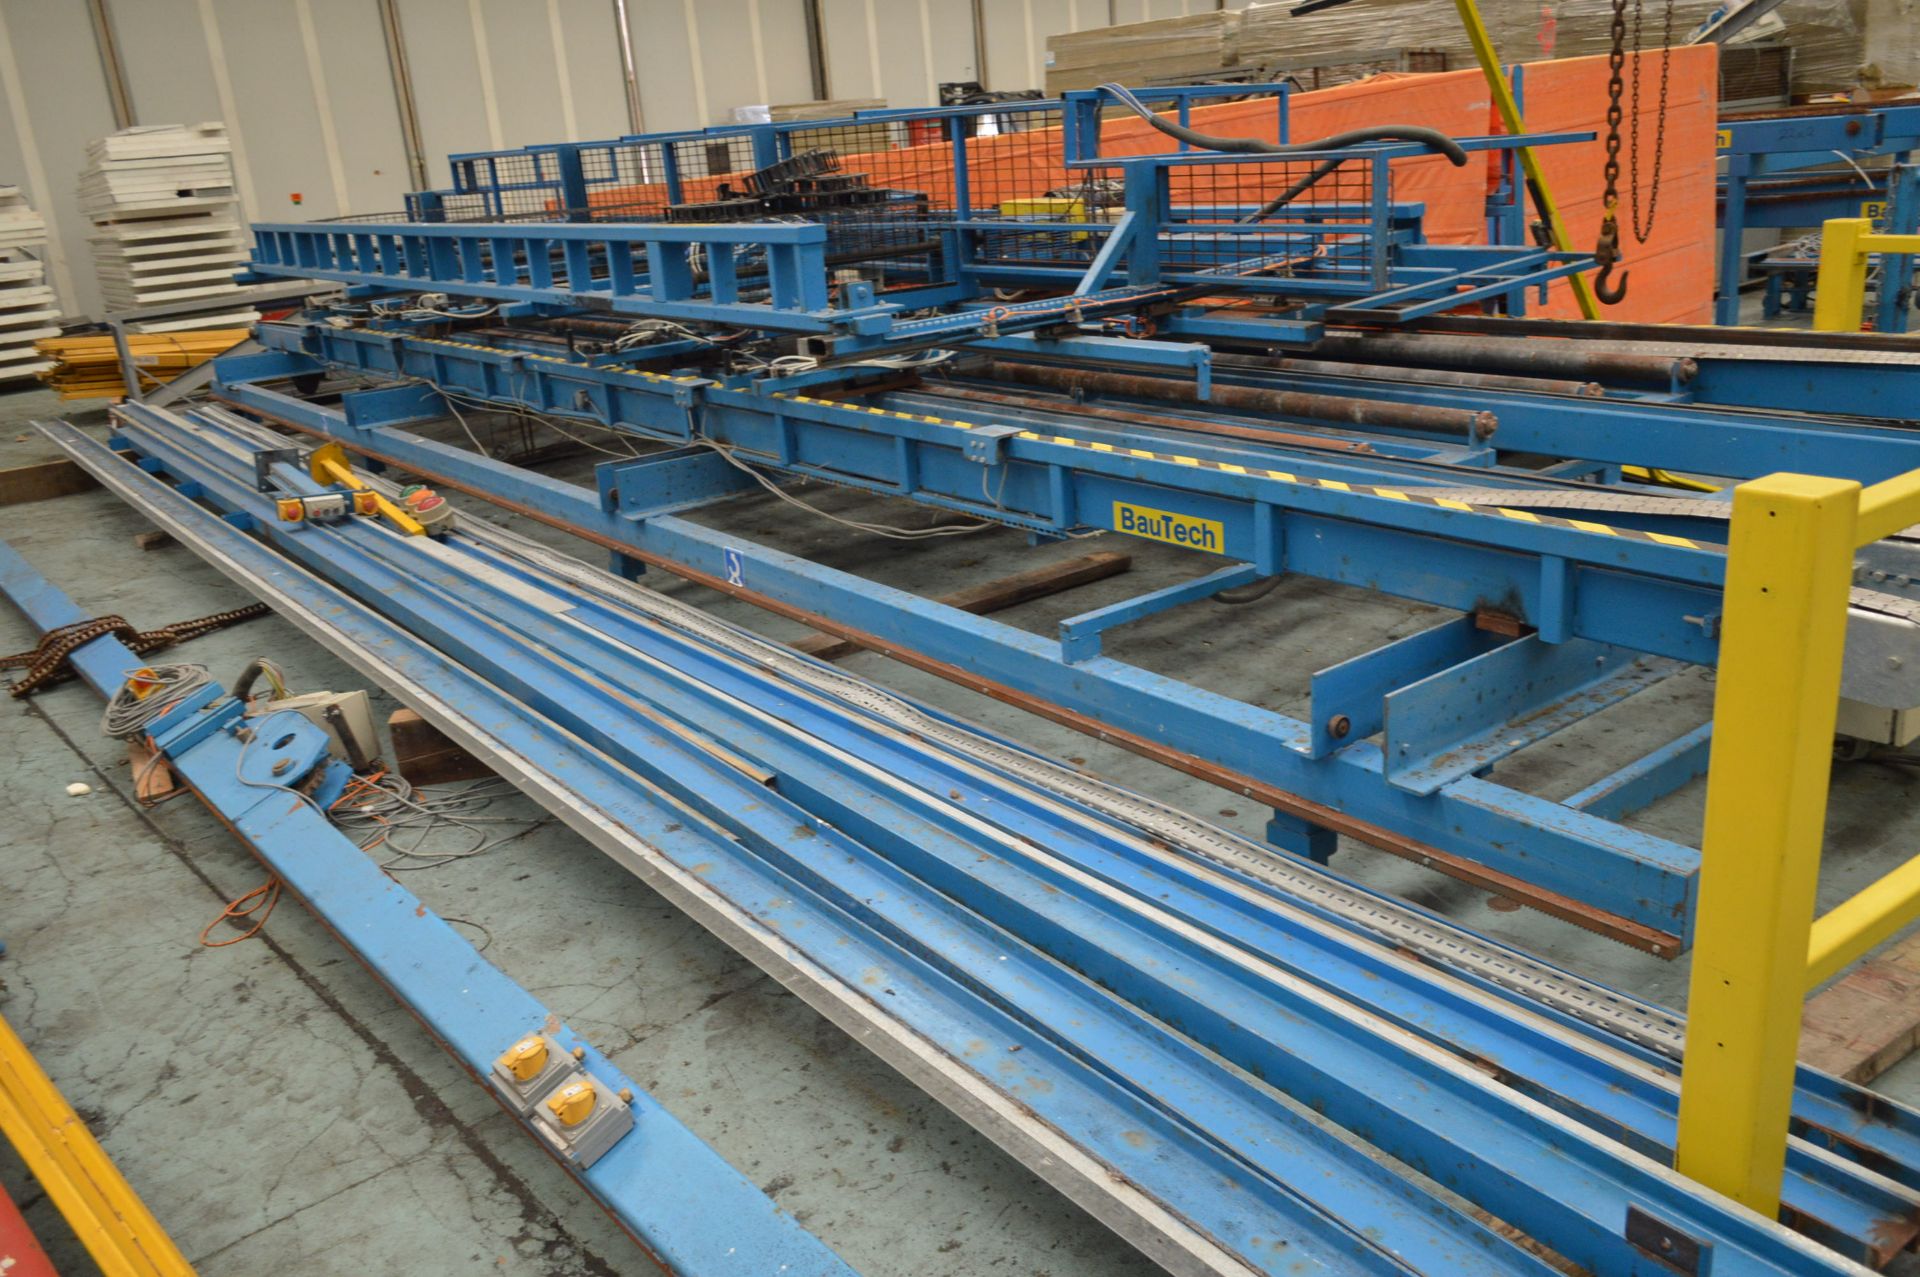 BauTech Conveyor & Components, as set out in one area - Image 2 of 2